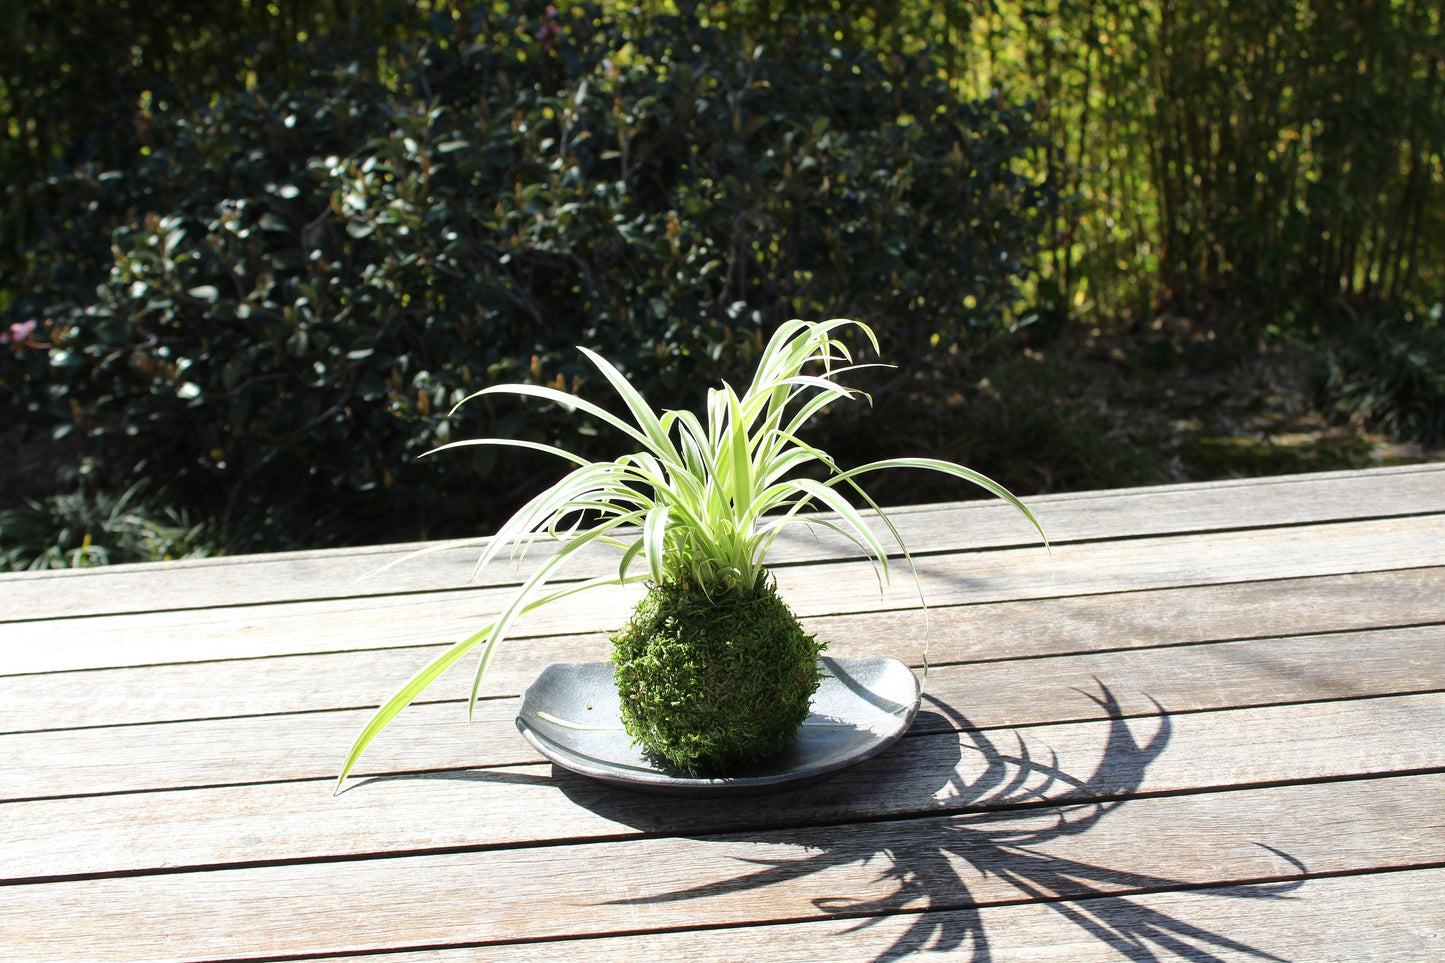 Spider plant (Chlorophytum comosum) Kokedama - Moss ball, One of NASA’s ‘Top Clean Air Plants!